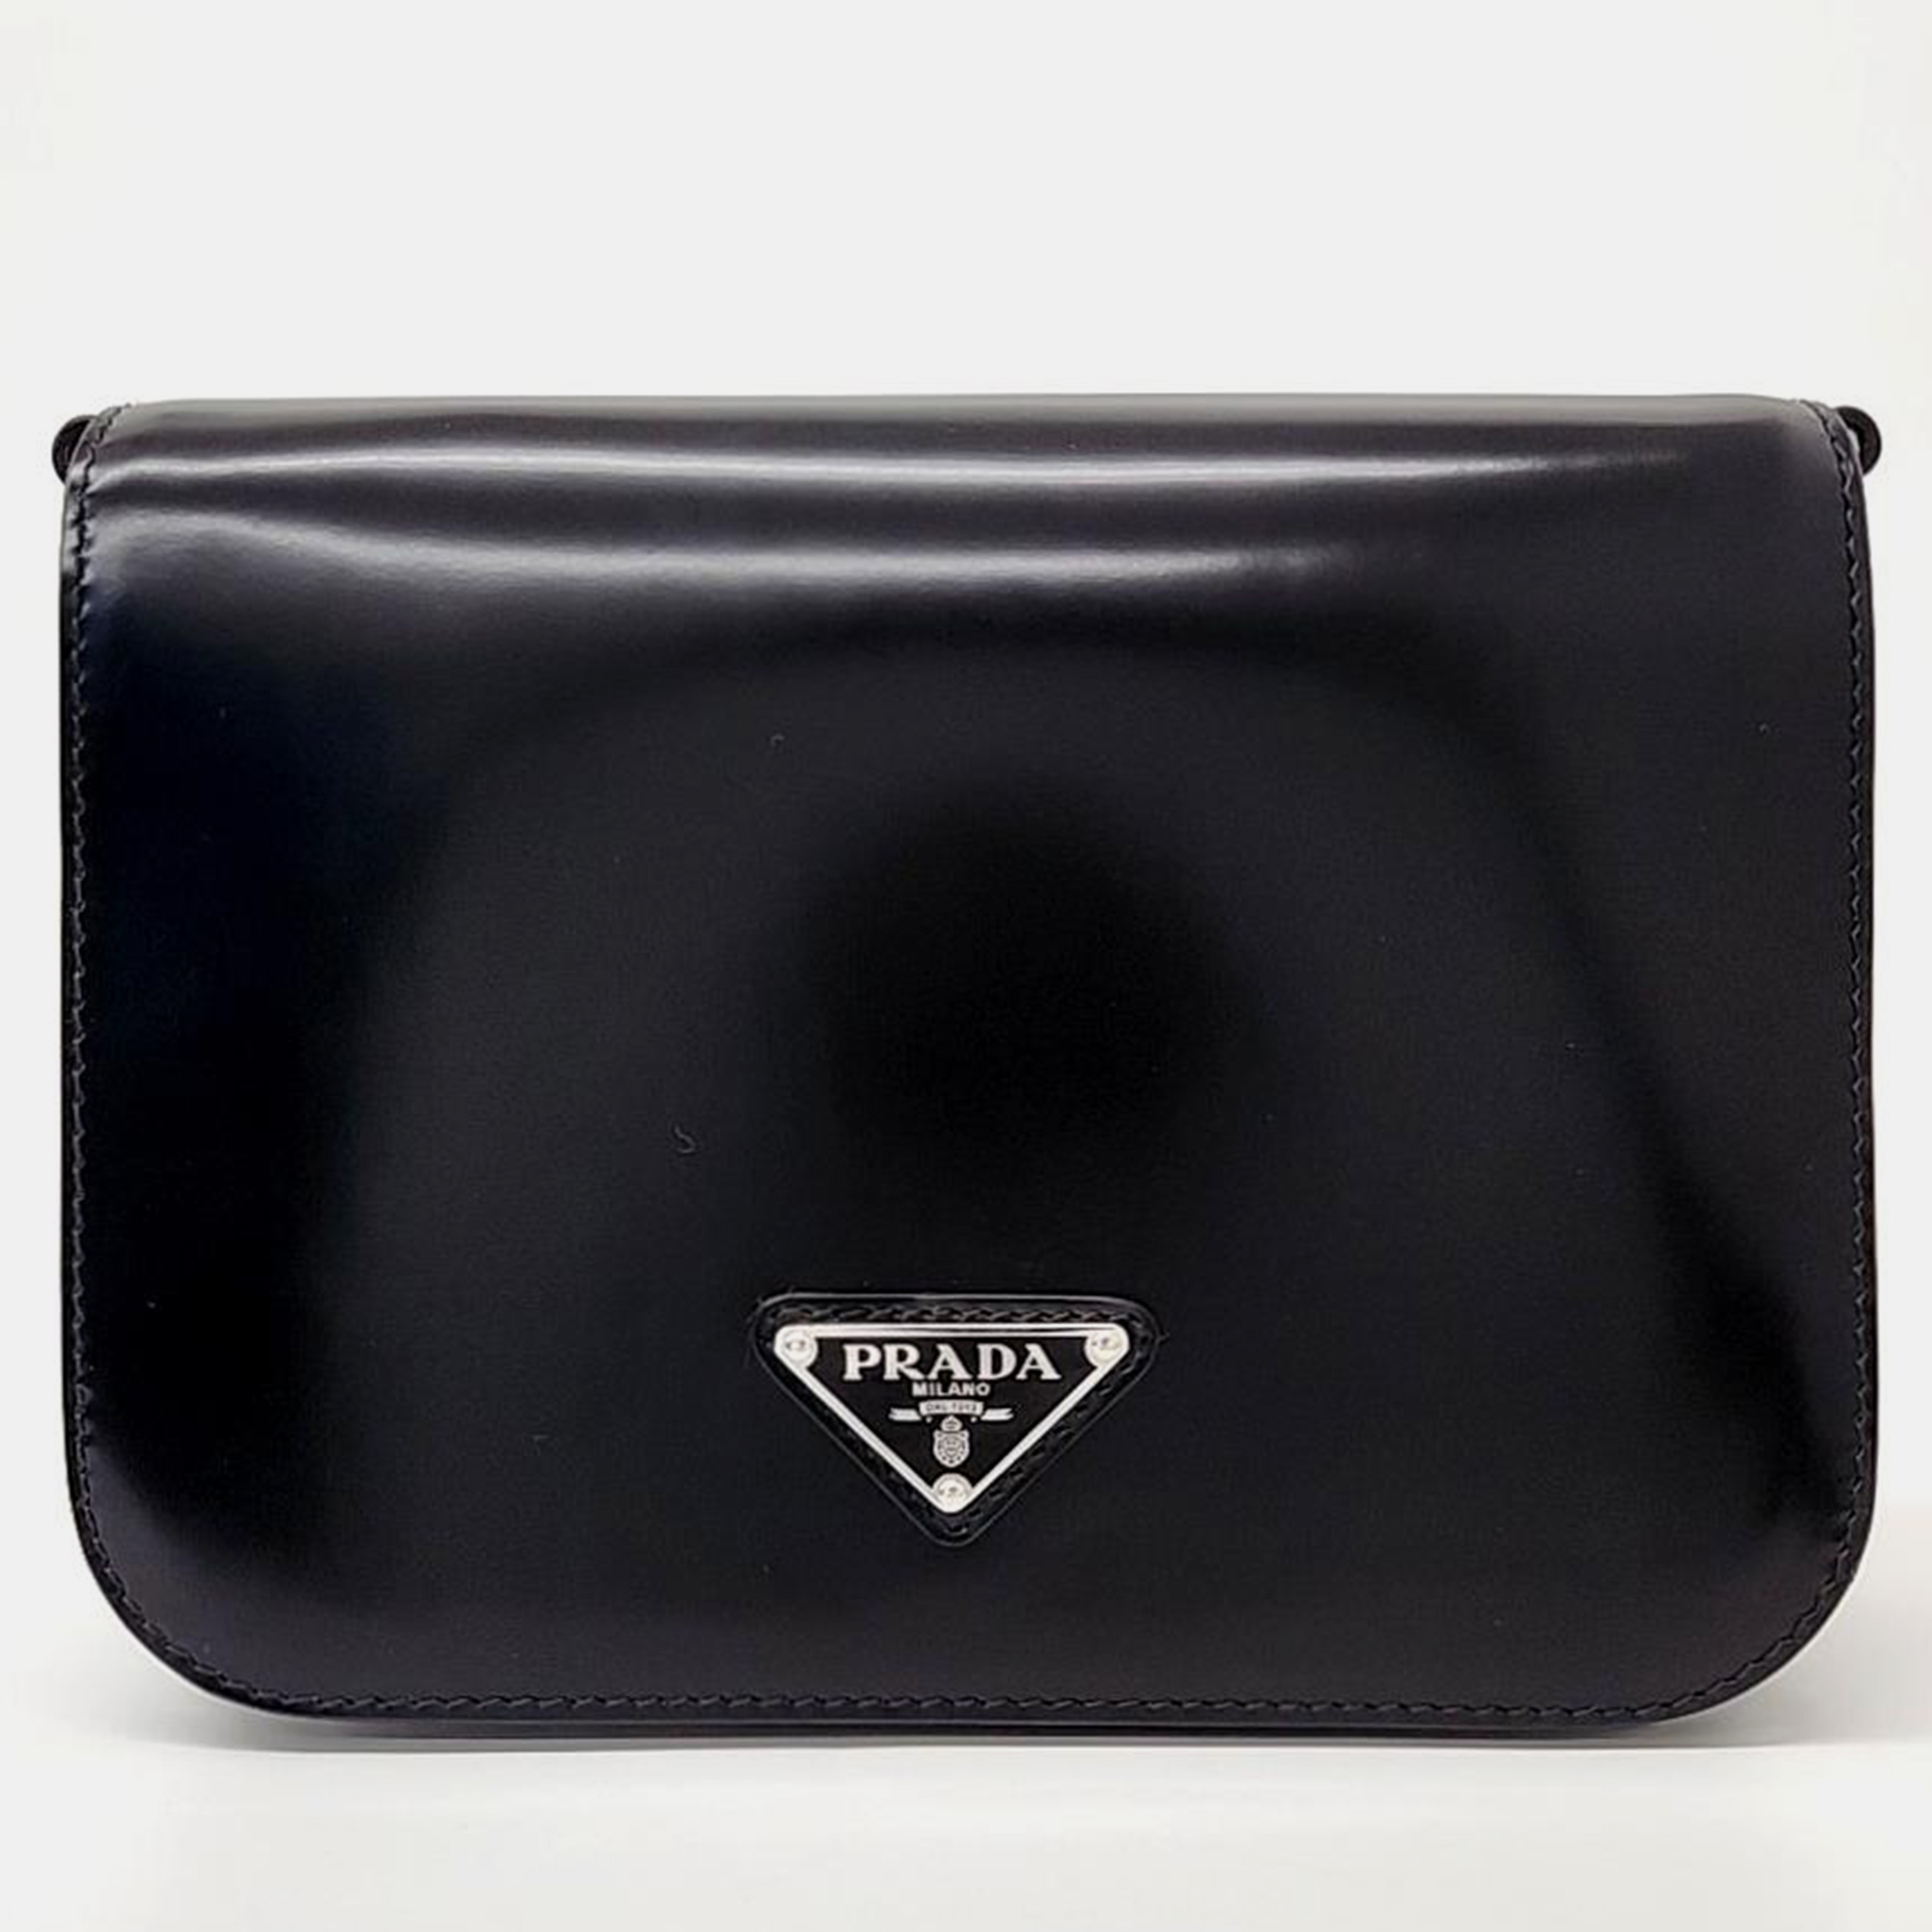 This elegant Prada bag is perfect to enhance your everyday style. It is carefully sewn and finished to be a wonderful investment in your closet.